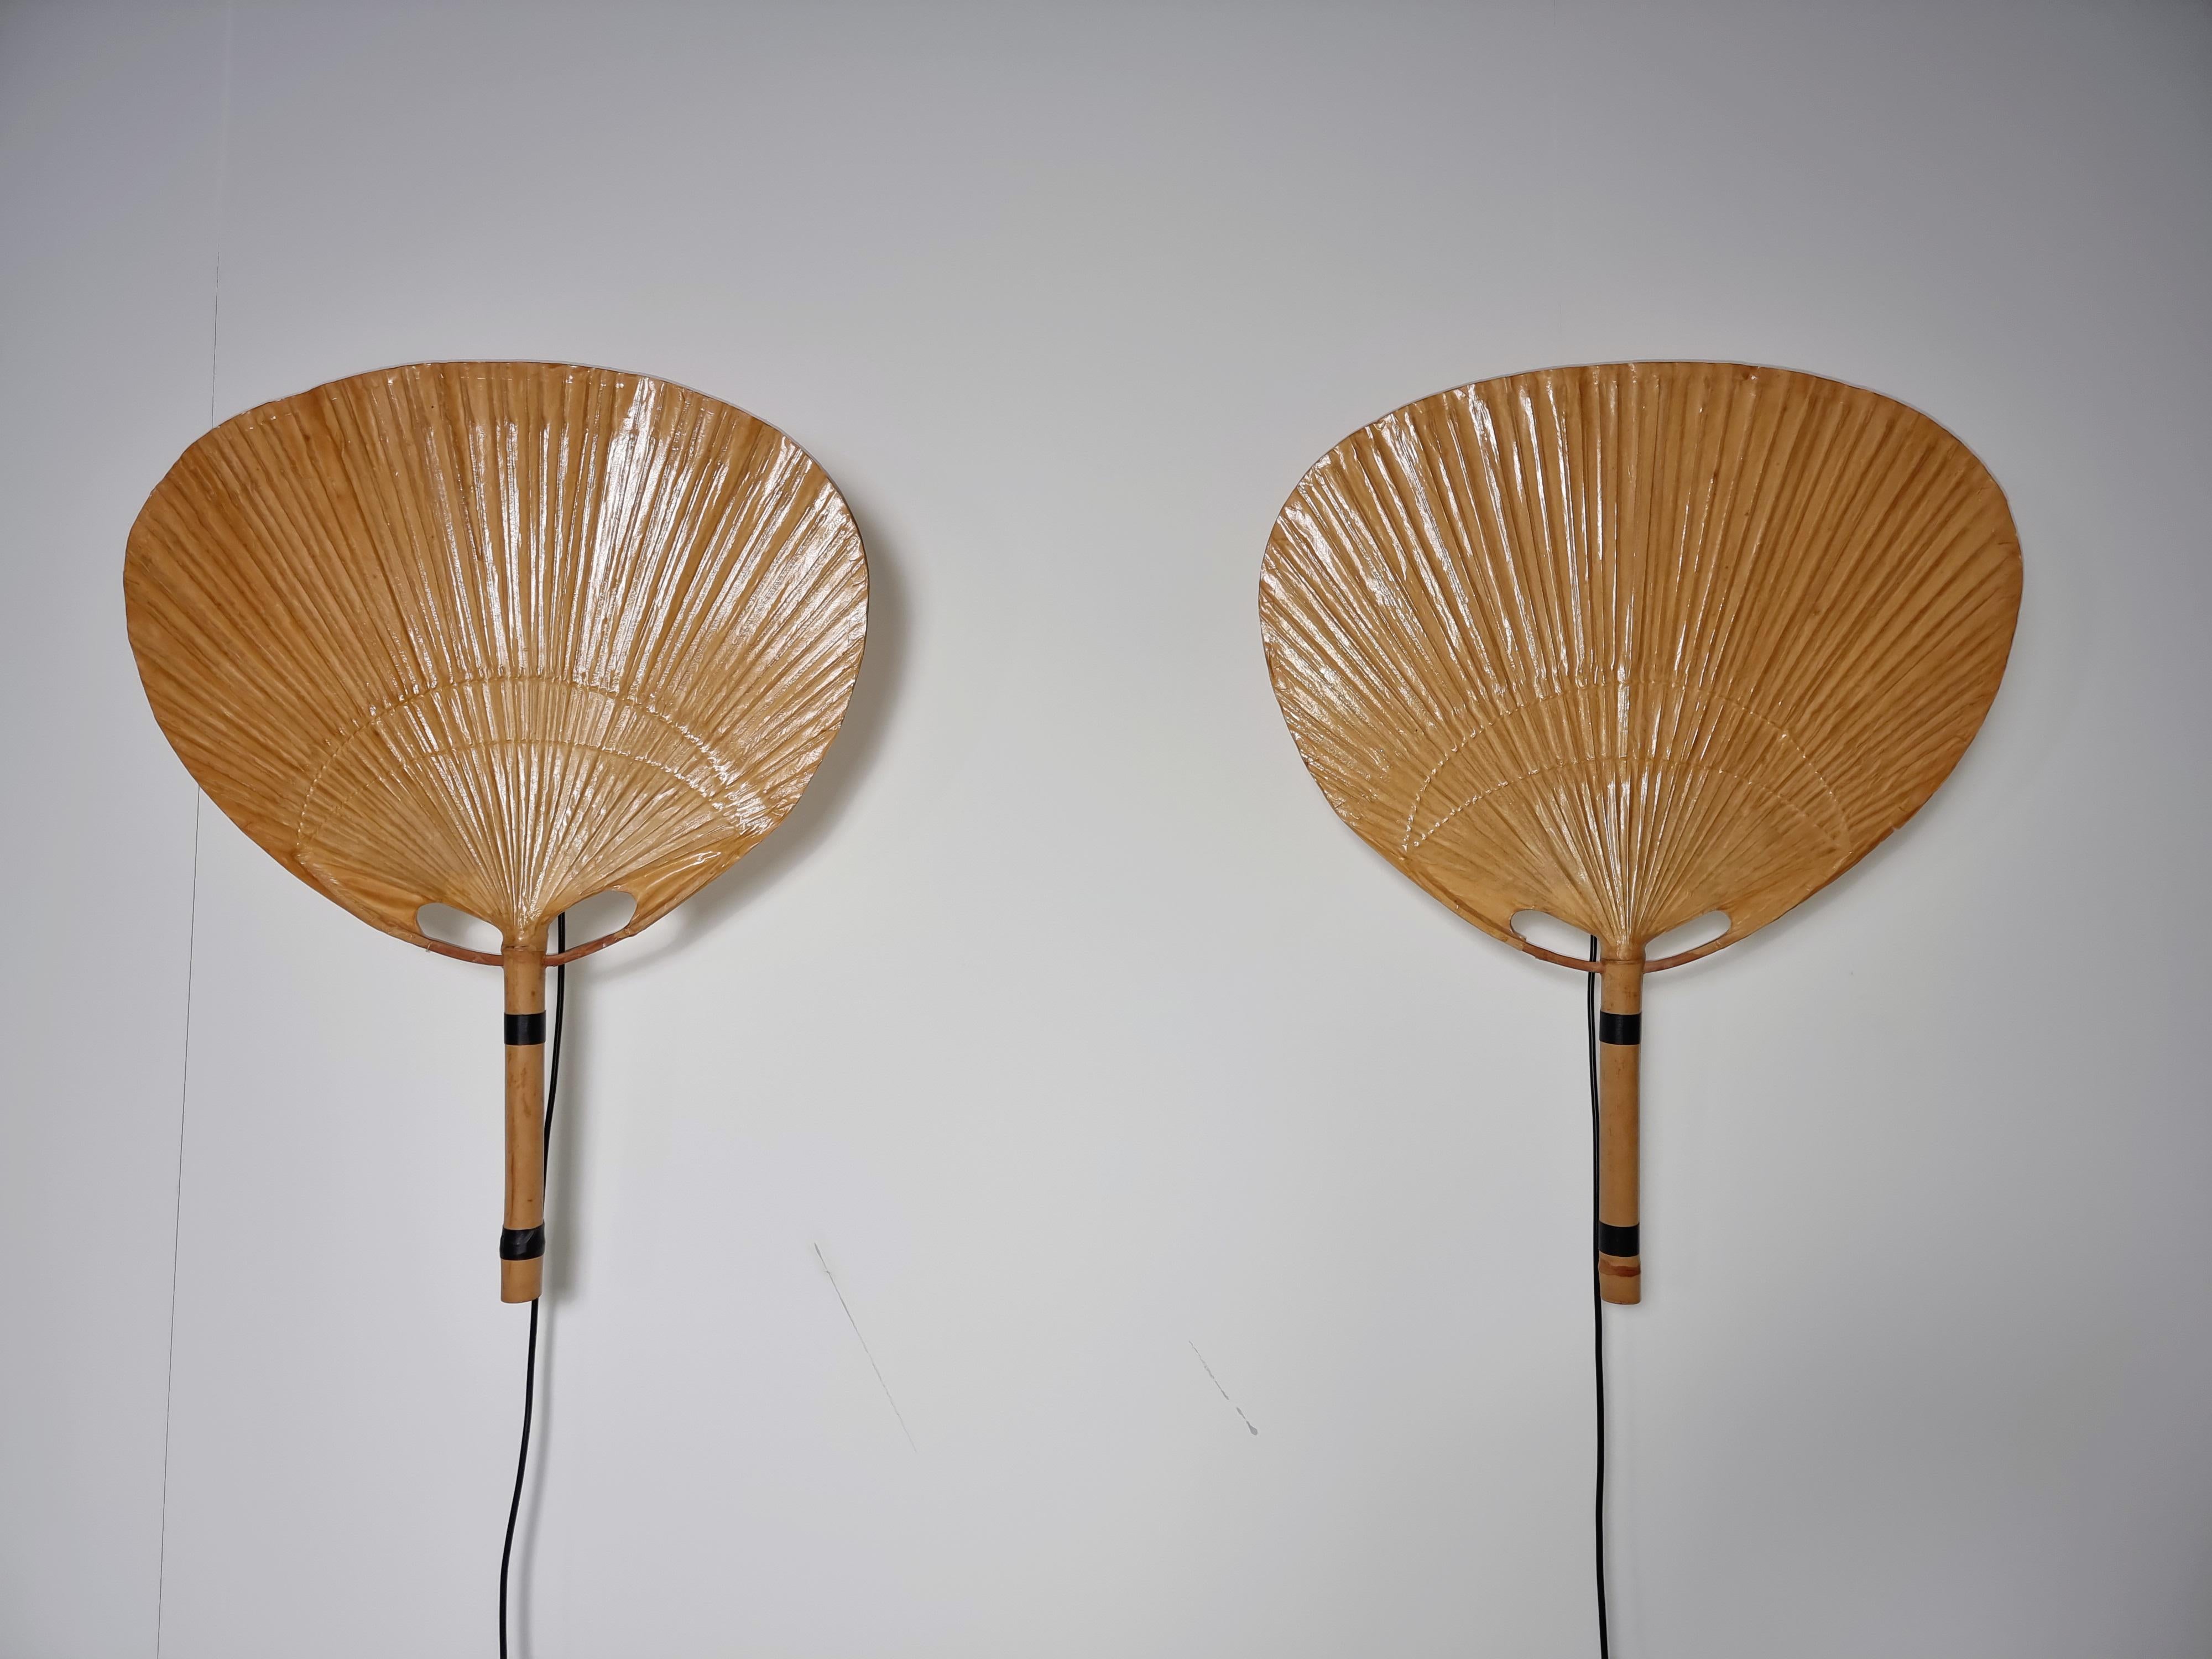 A pair of Uchiwa III wall lights by Ingo Maurer for Design M, 1970s, Germany. All the Uchiwa lamps were handcrafted from Japanese bamboo and rice paper. It gives a beautifully warm and diffuse glow. Quite difficult to find examples in very good